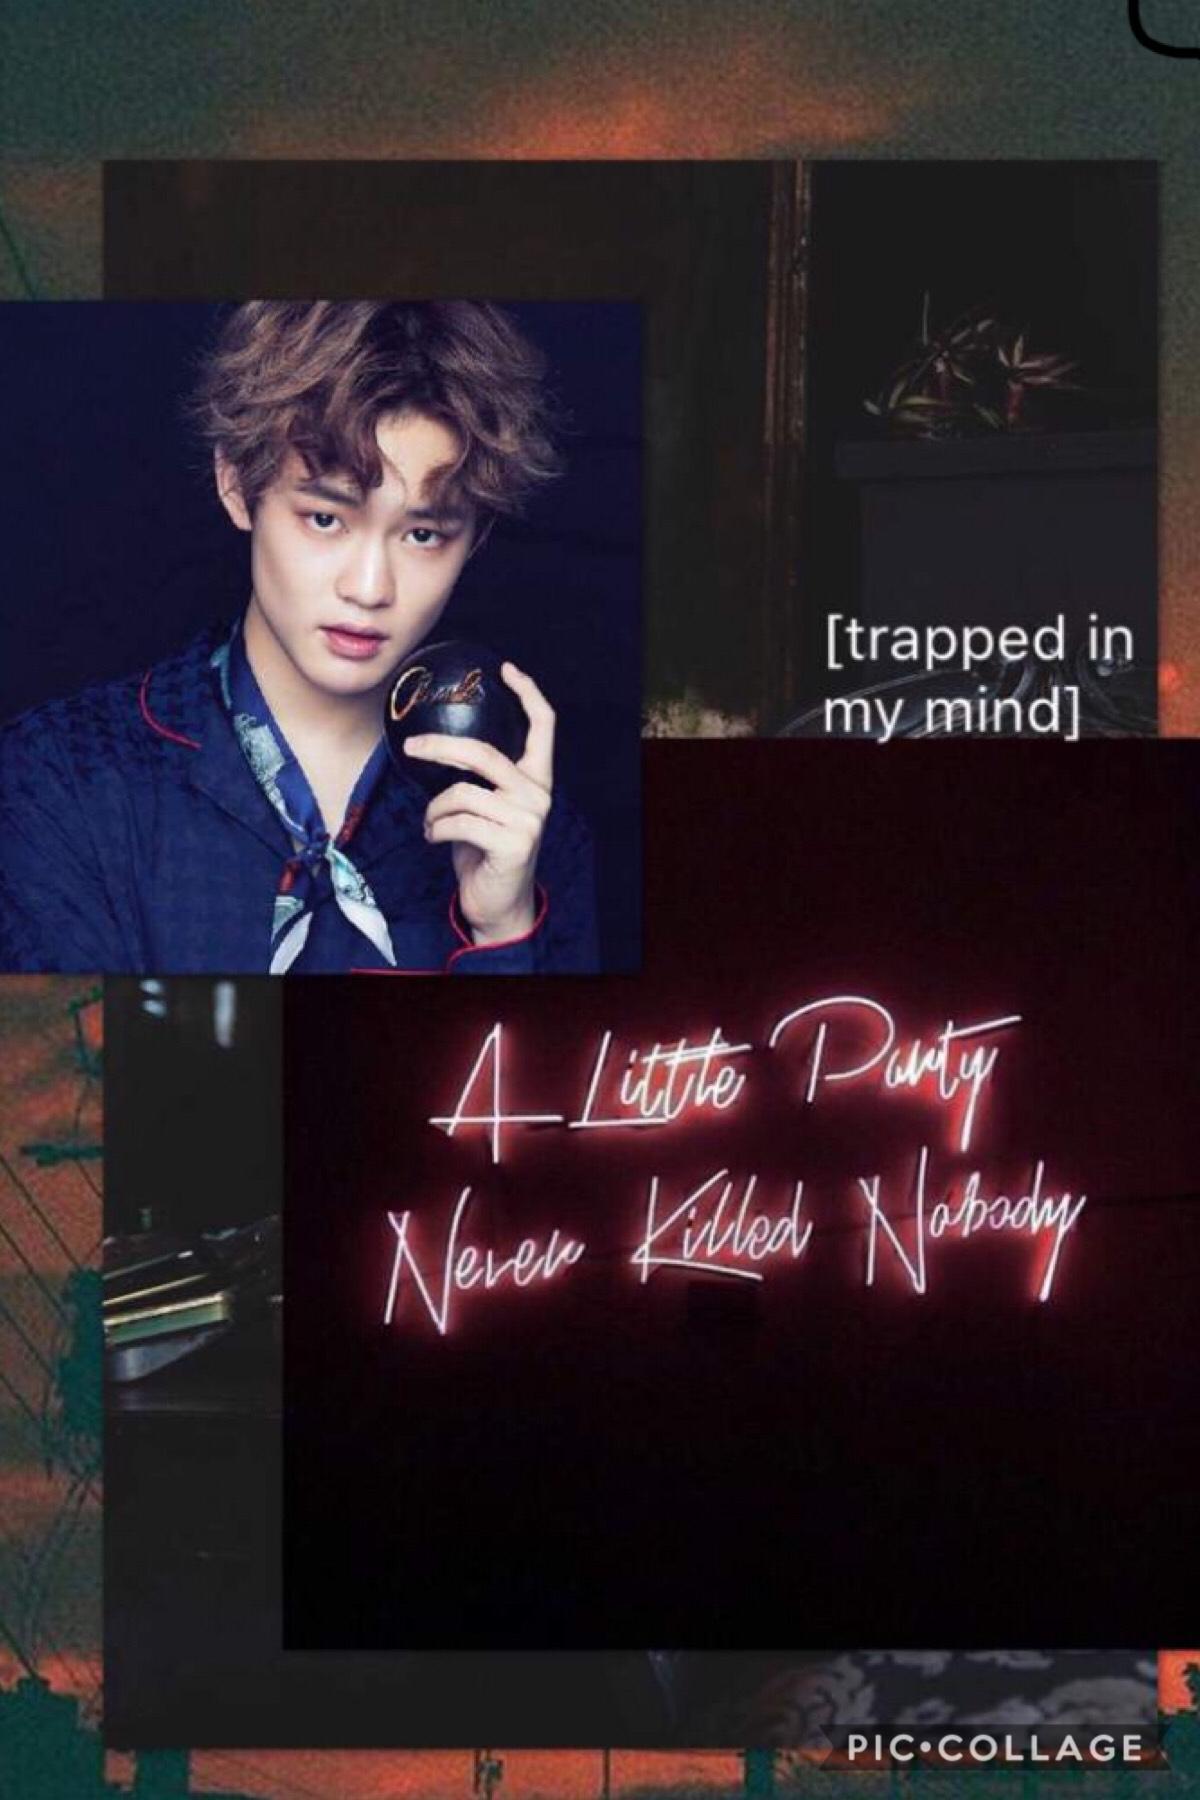 so i made this edit agessss ago, even before i made that hard jimin edit (remember, the black one?) but i didn’t post it bc i guess i just wasn’t posting @ the time🤷‍♀️
anyhoo this is chenle from nct. he is my child (aka bias) and the whole world should l